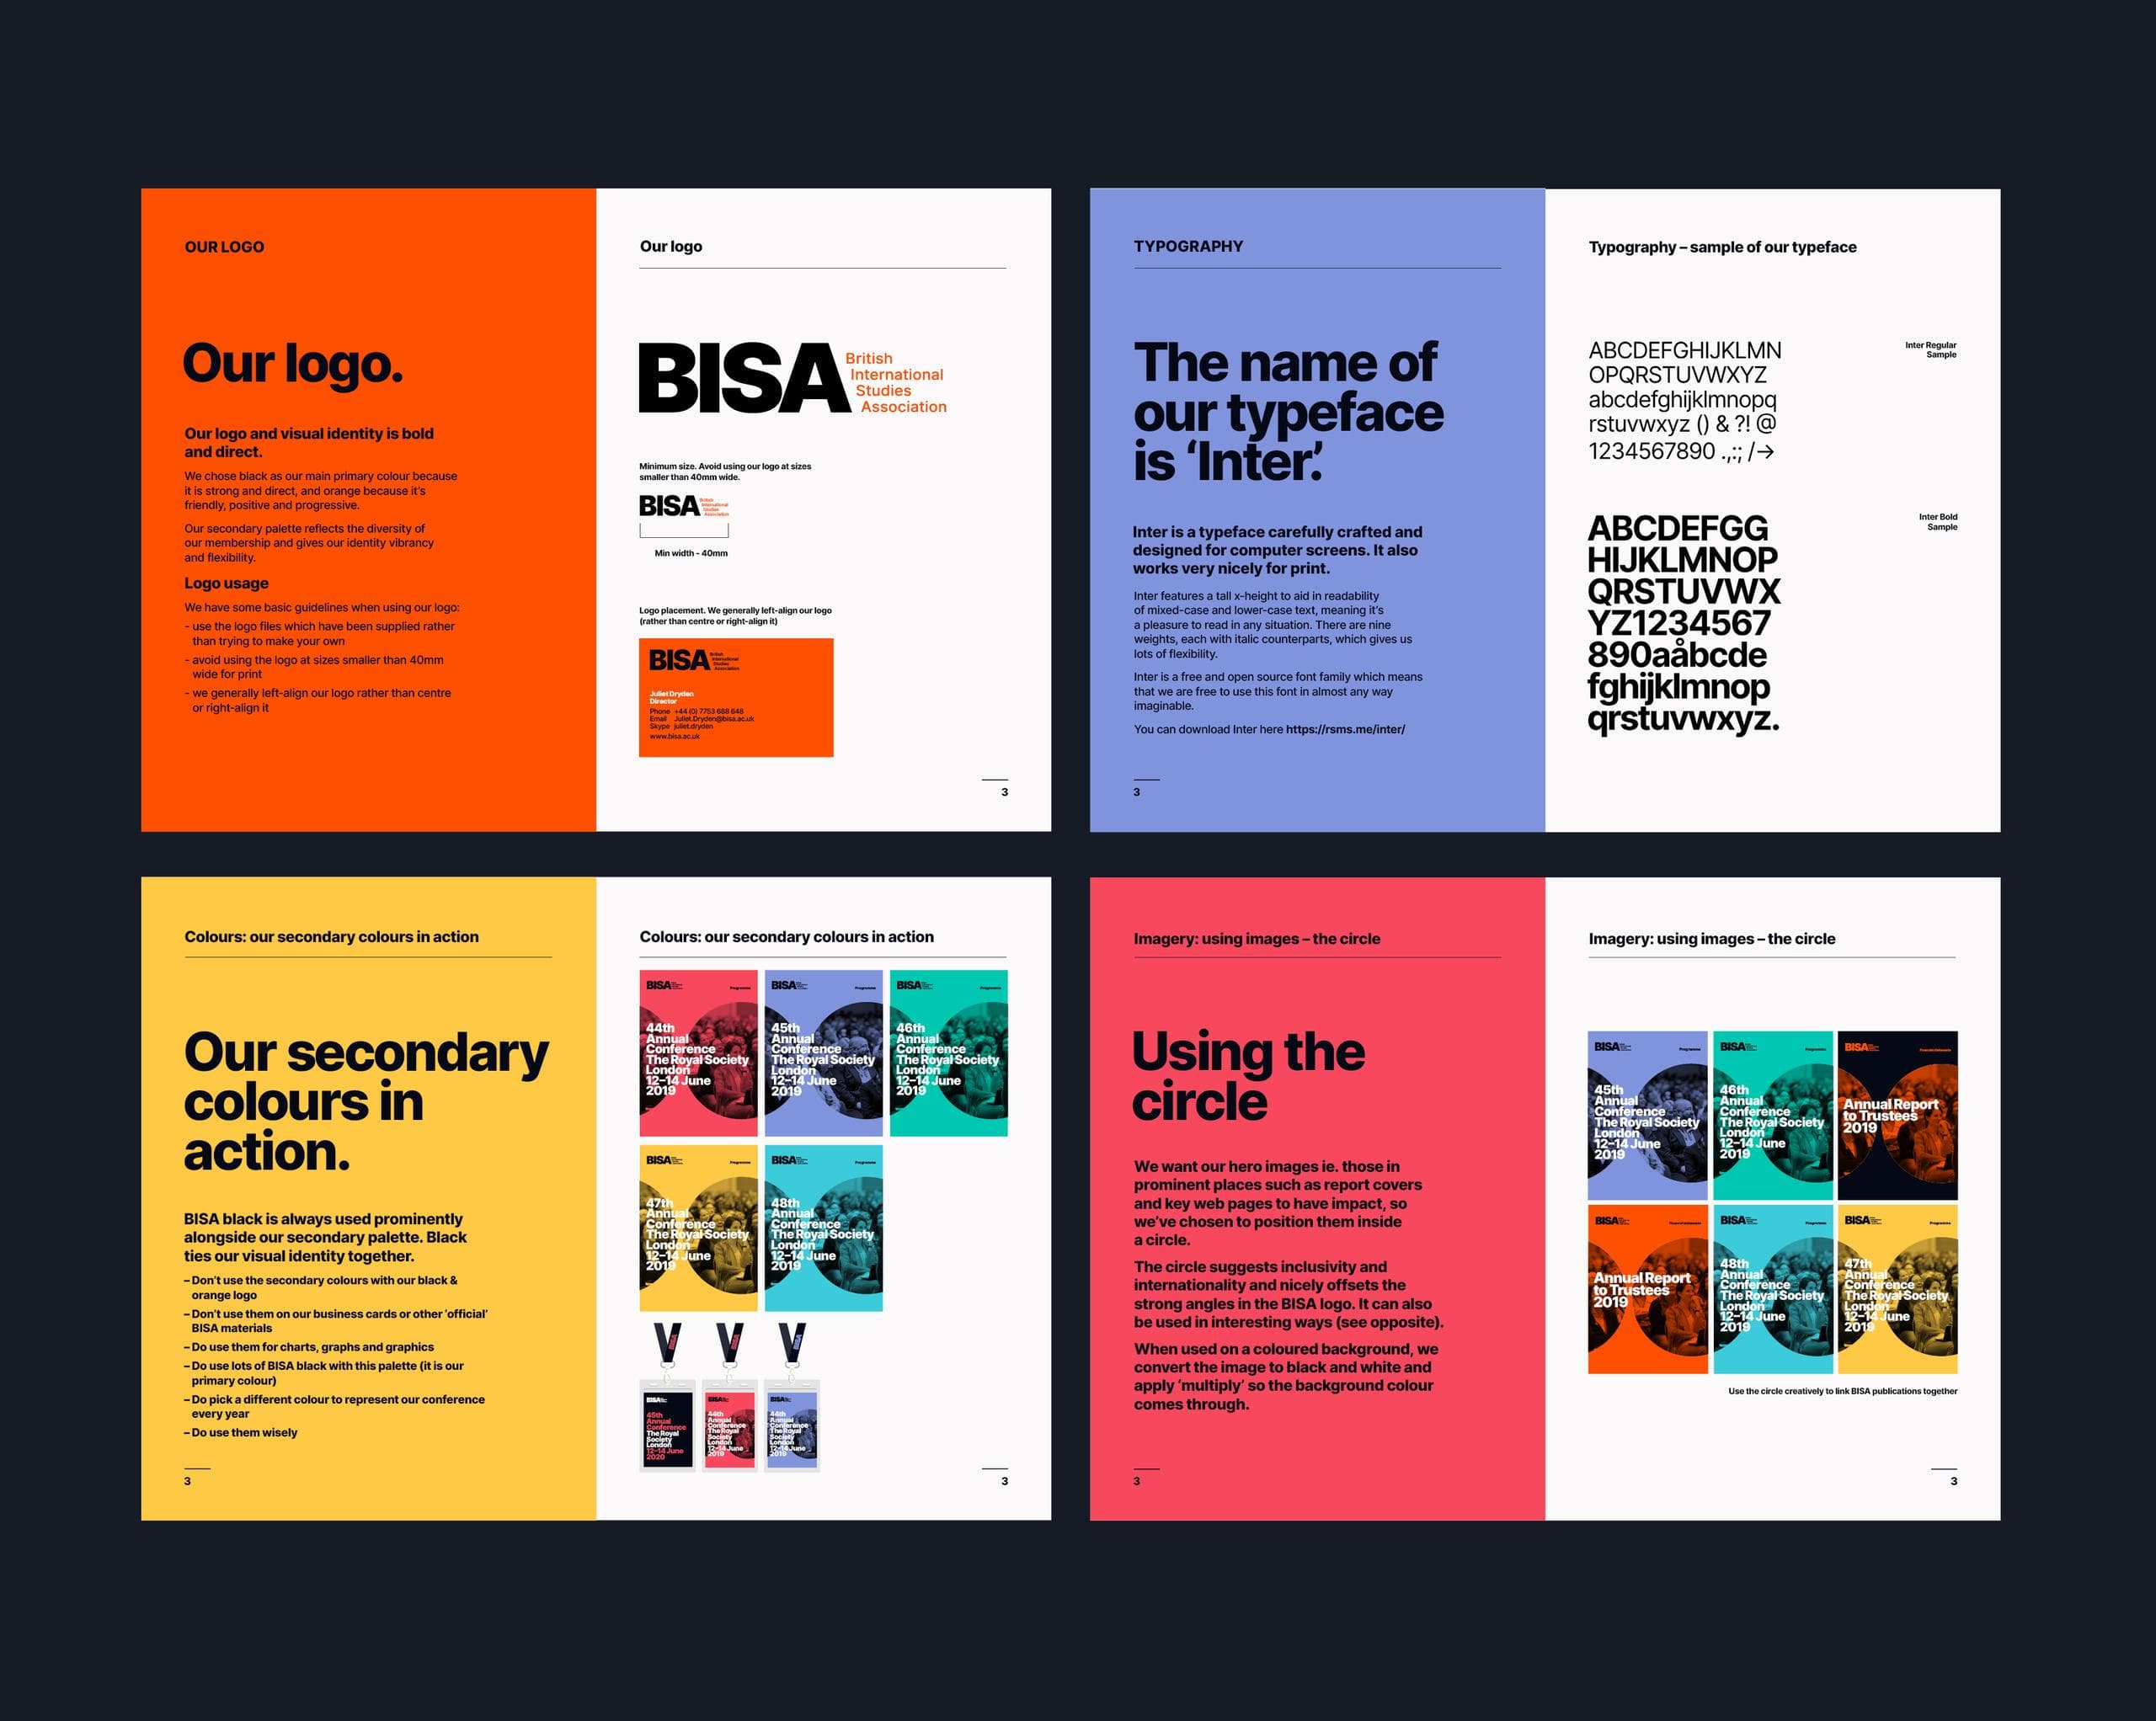 Some pages from the new brand guidelines